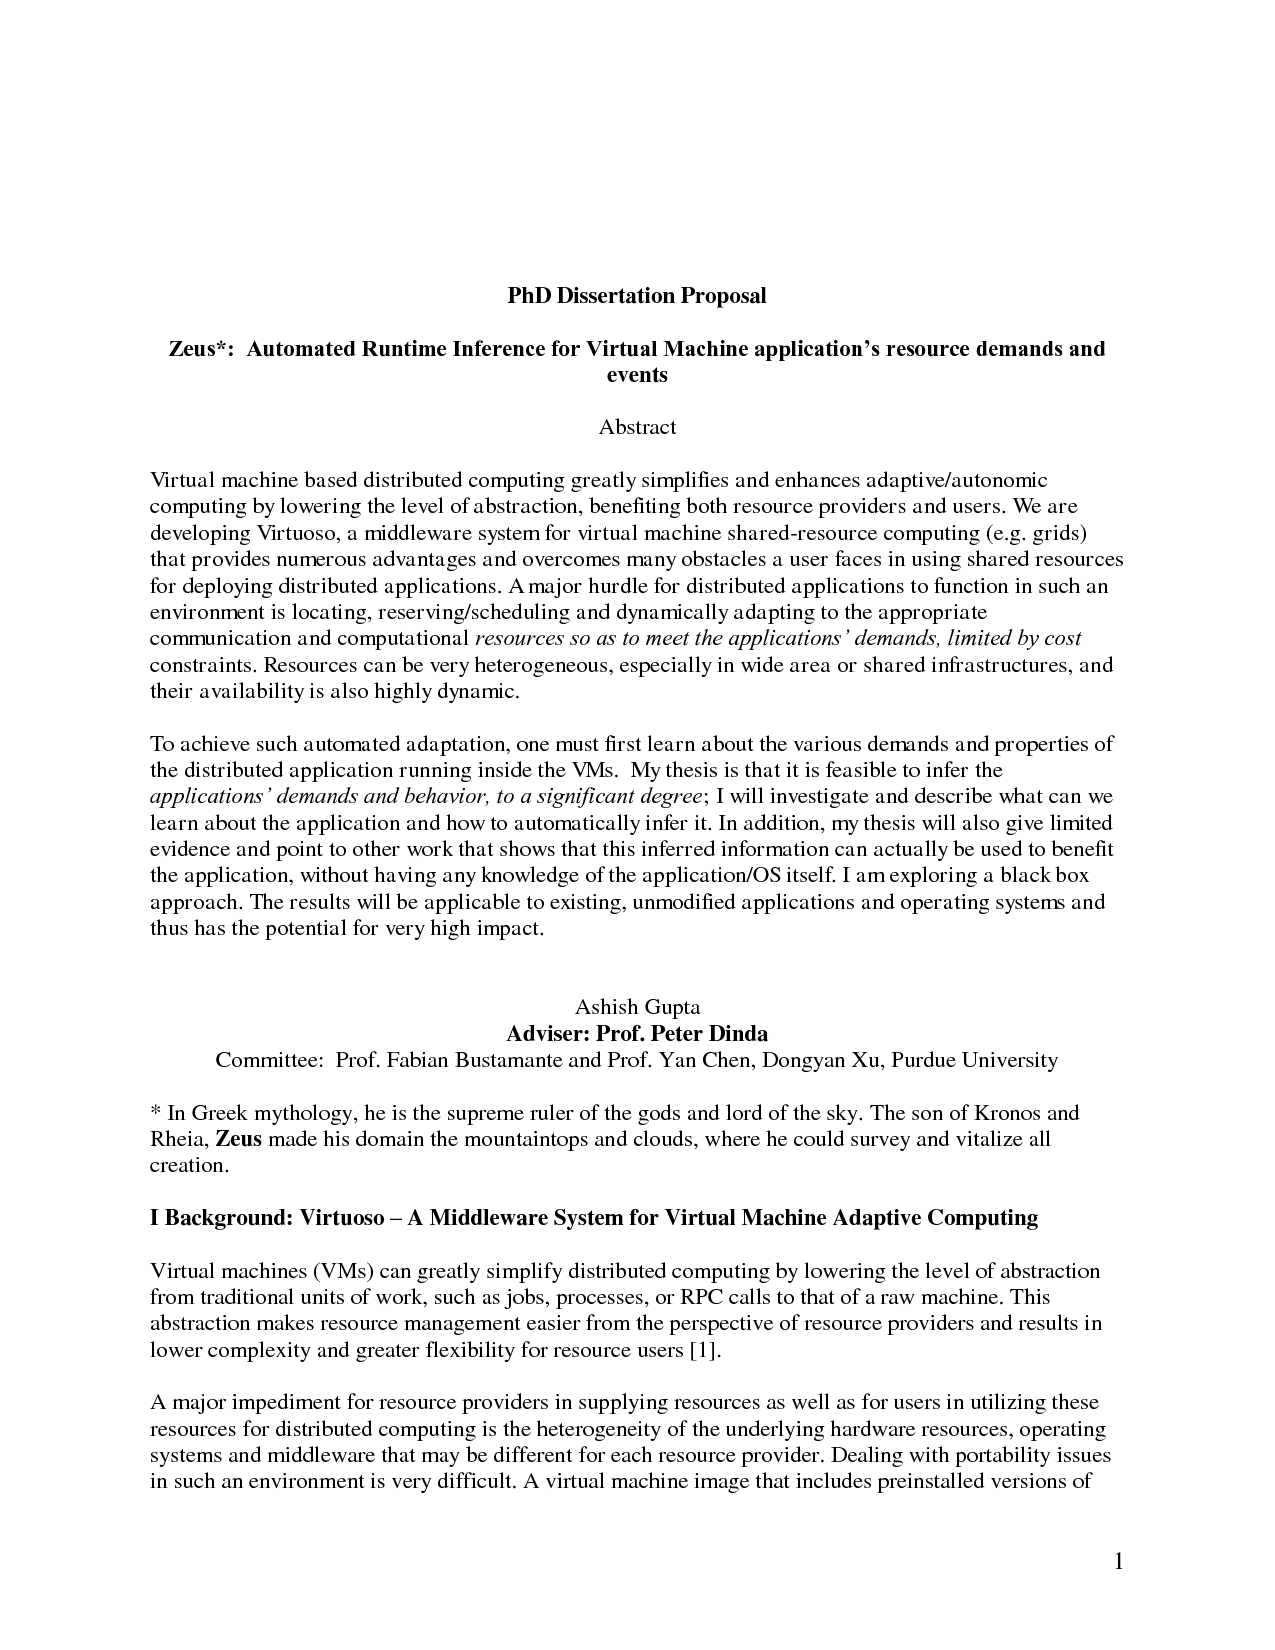 Abstract of thesis phd